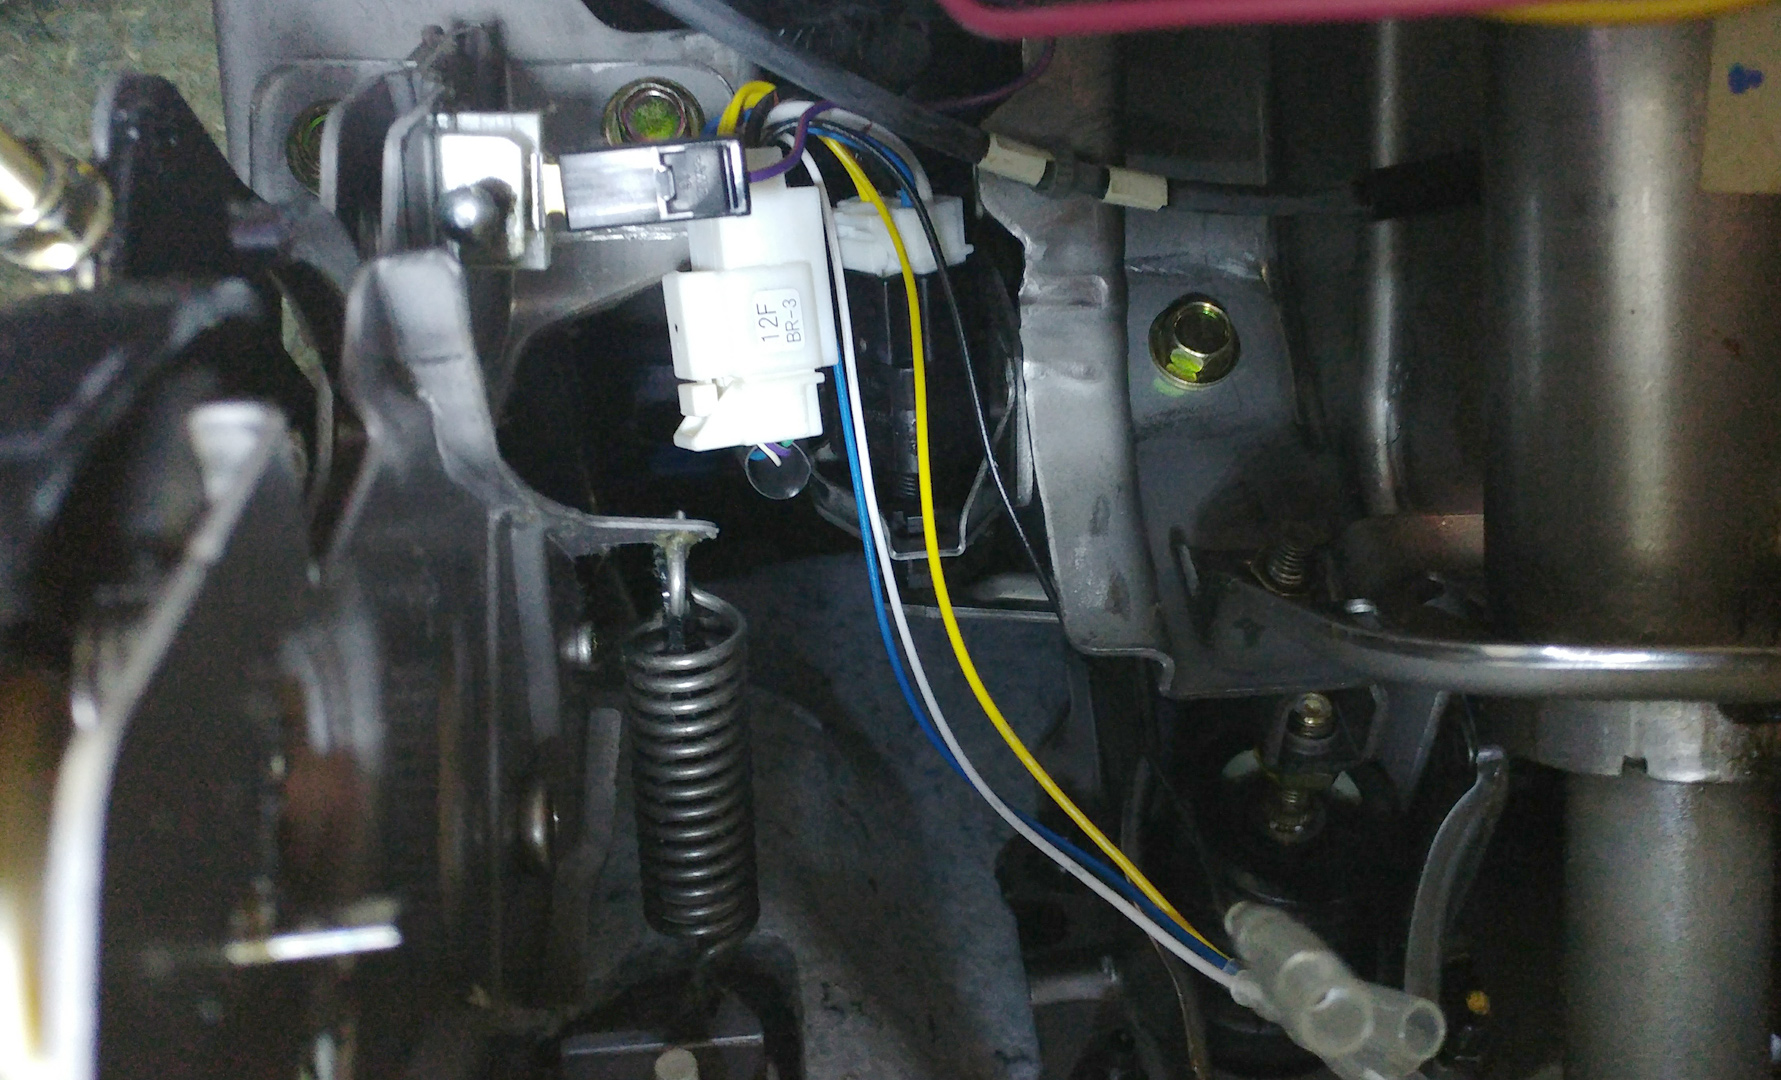 Brake harness connected